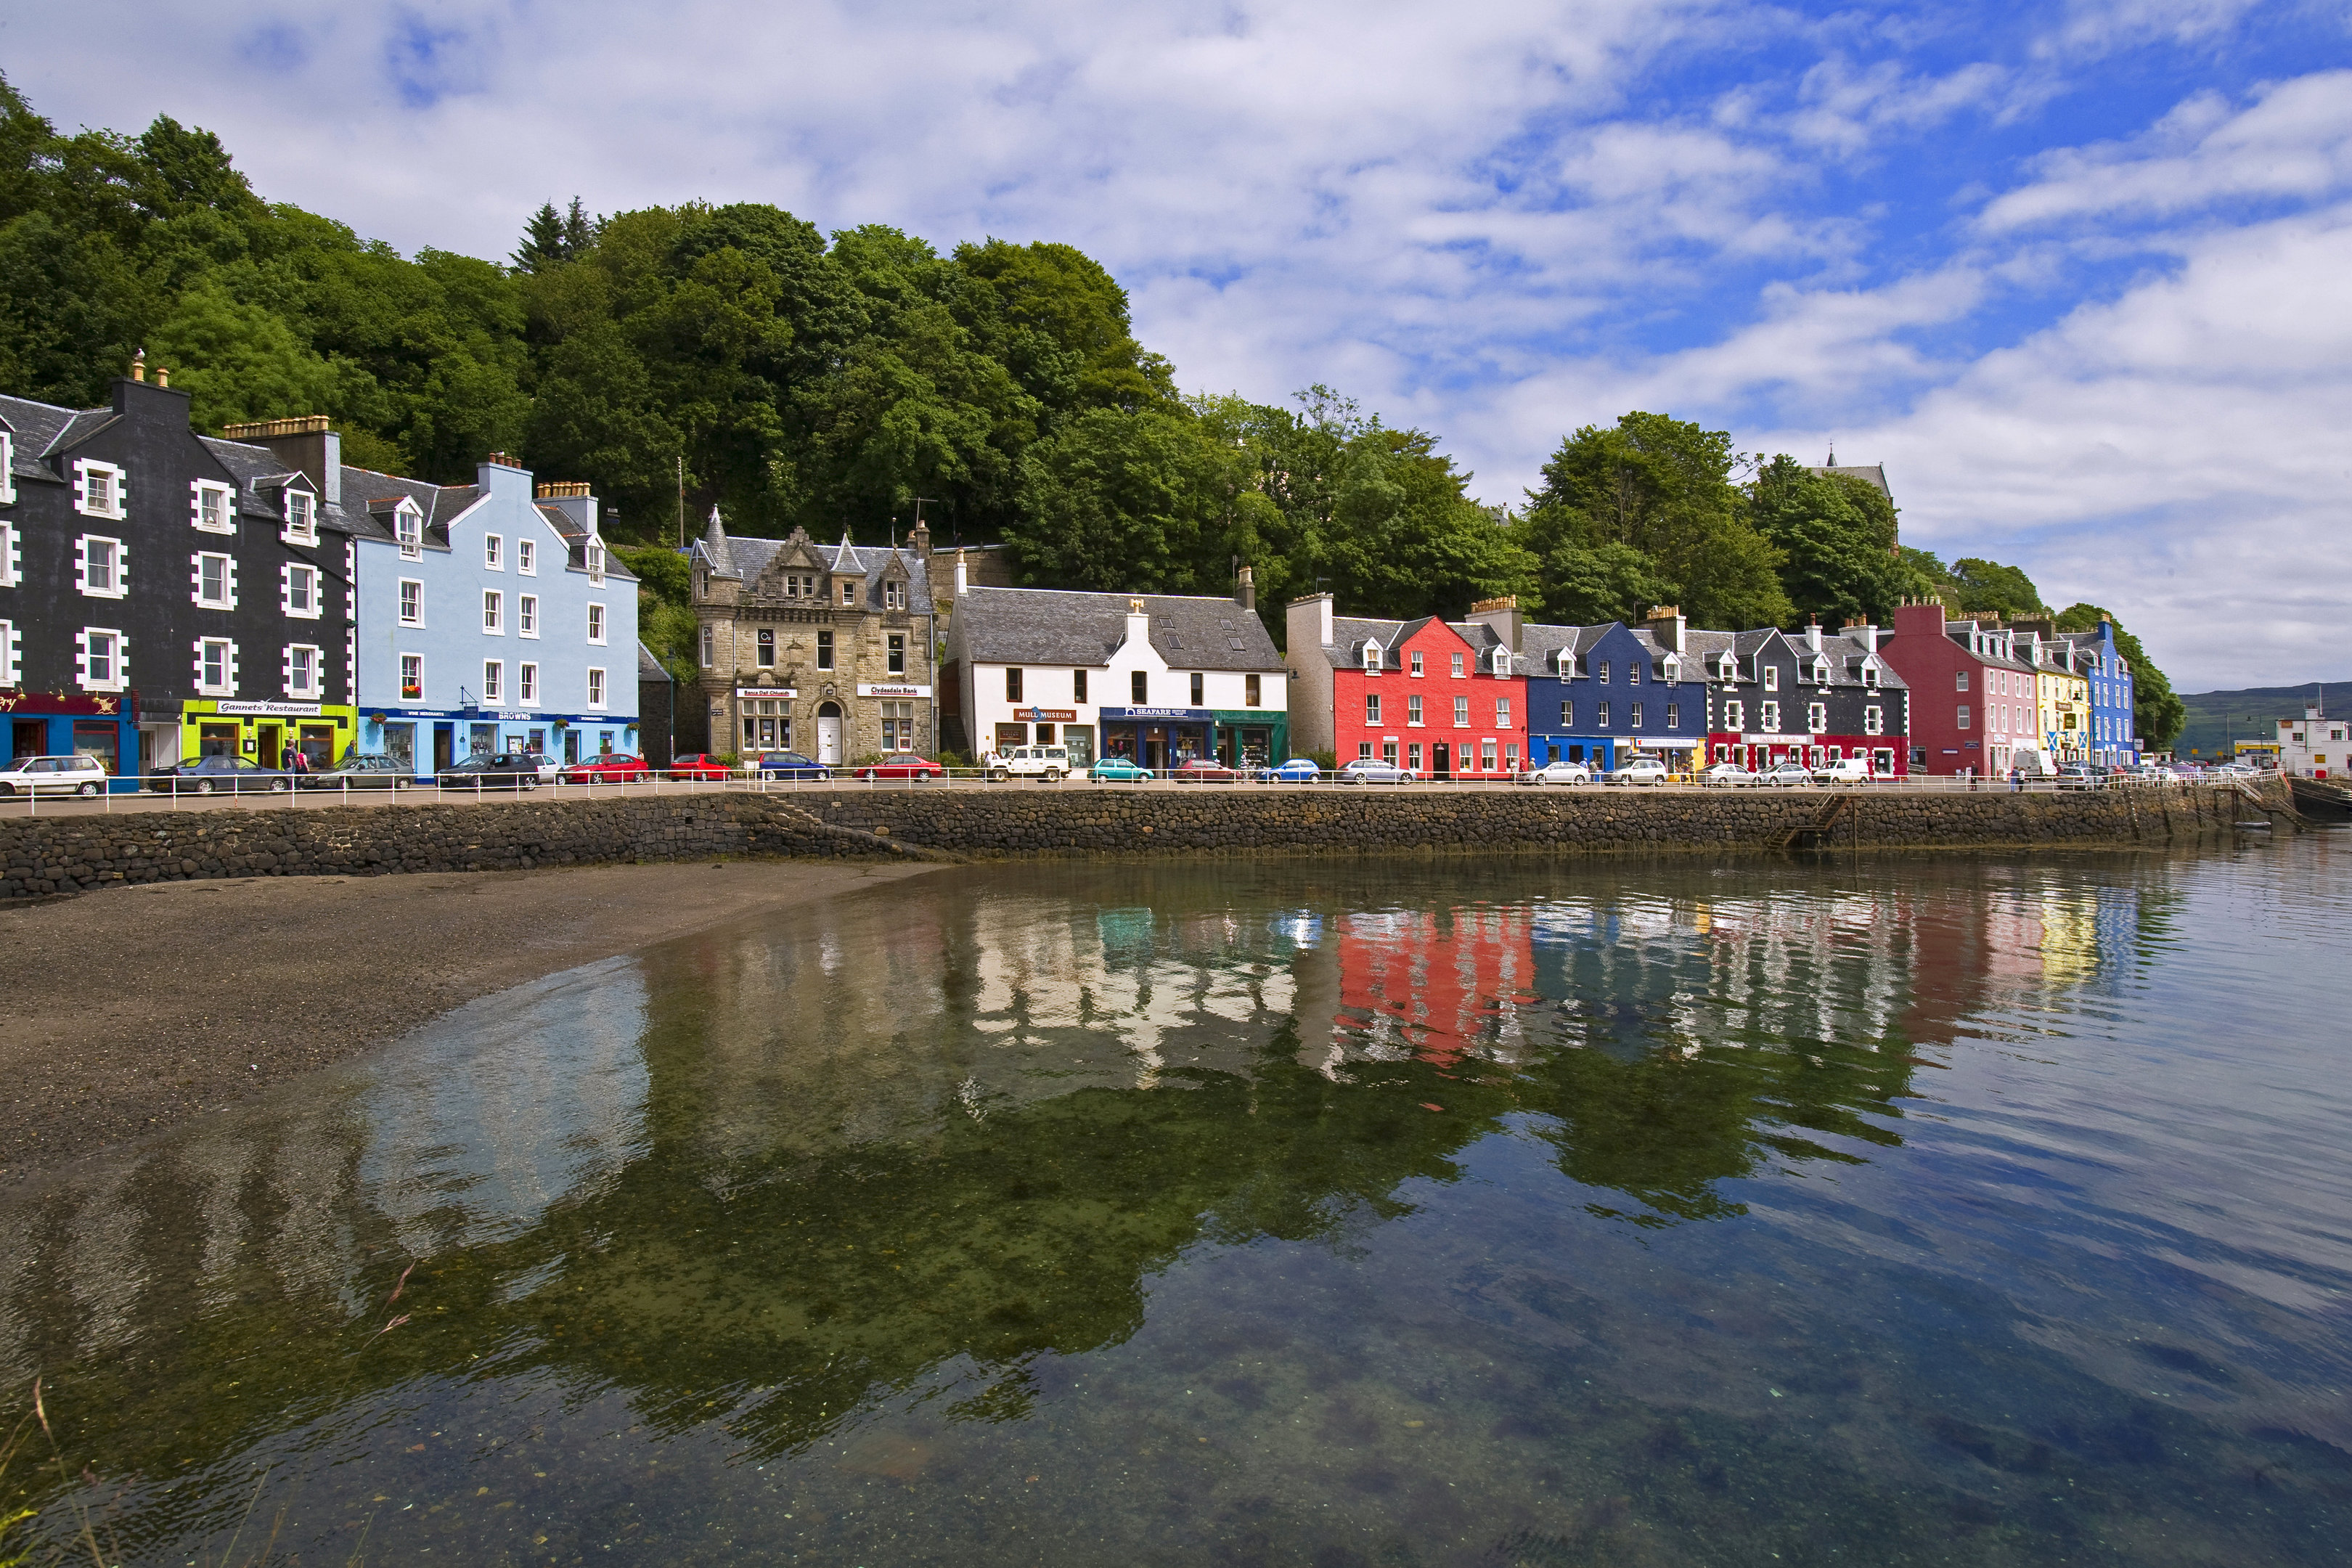 Tobermory in Mull is better known to many as the fictional coastal village of Balamory.